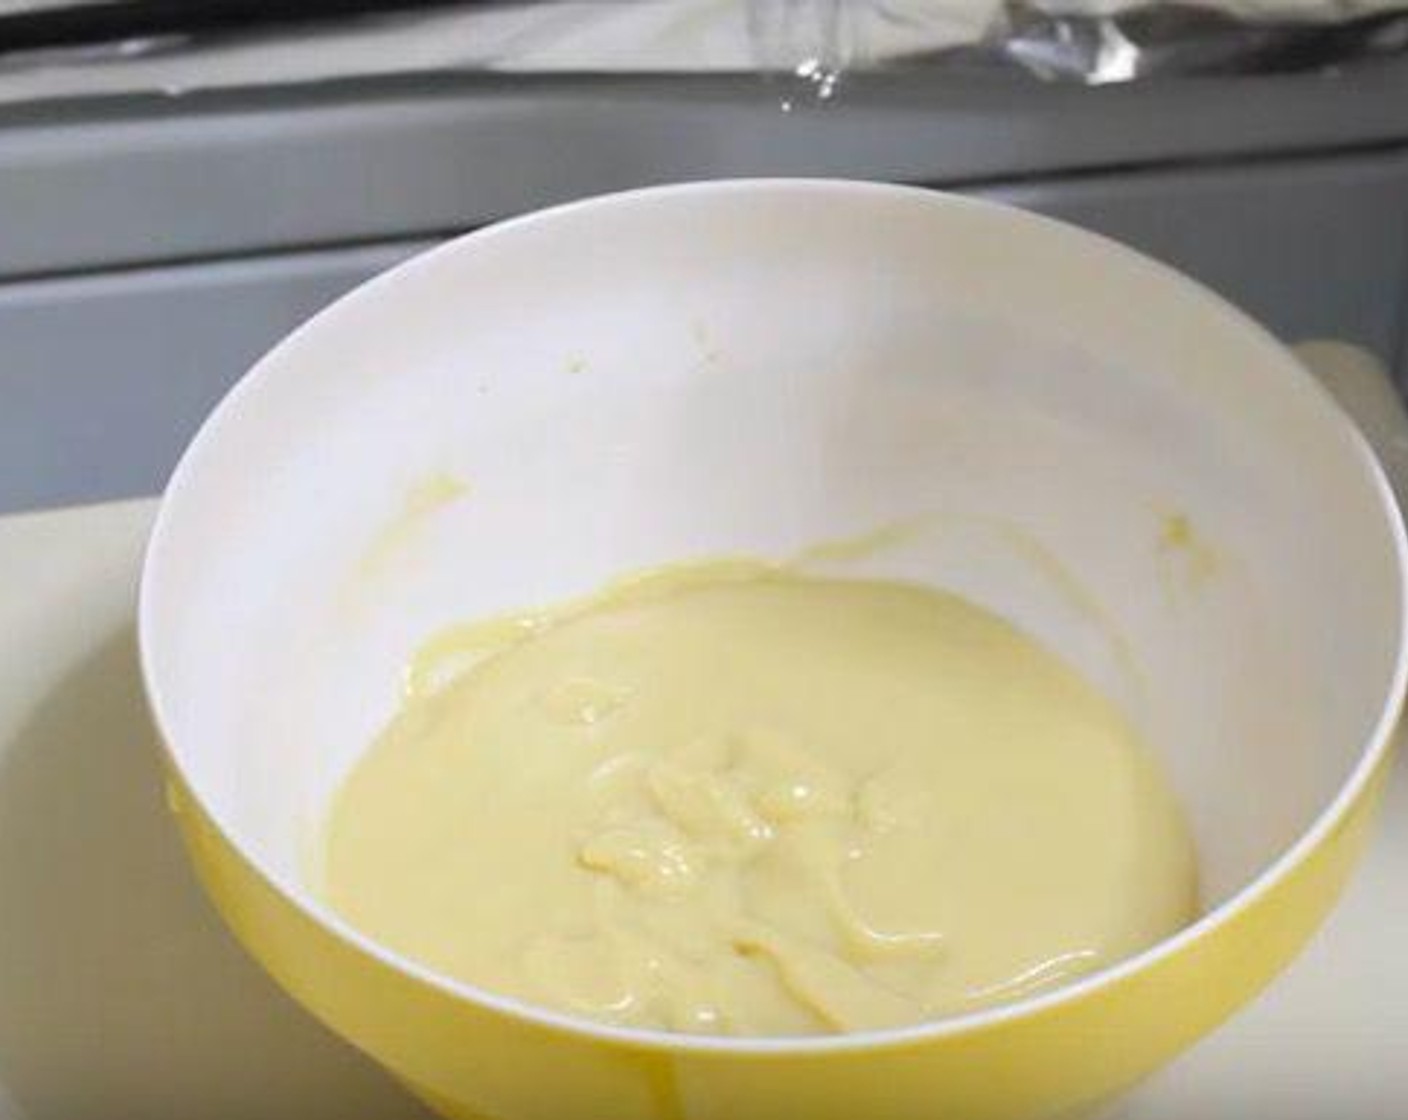 step 2 Pass custard through a strainer into another dish. Cover in plastic wrap, making sure the plastic wrap touches the custard. Store in fridge.